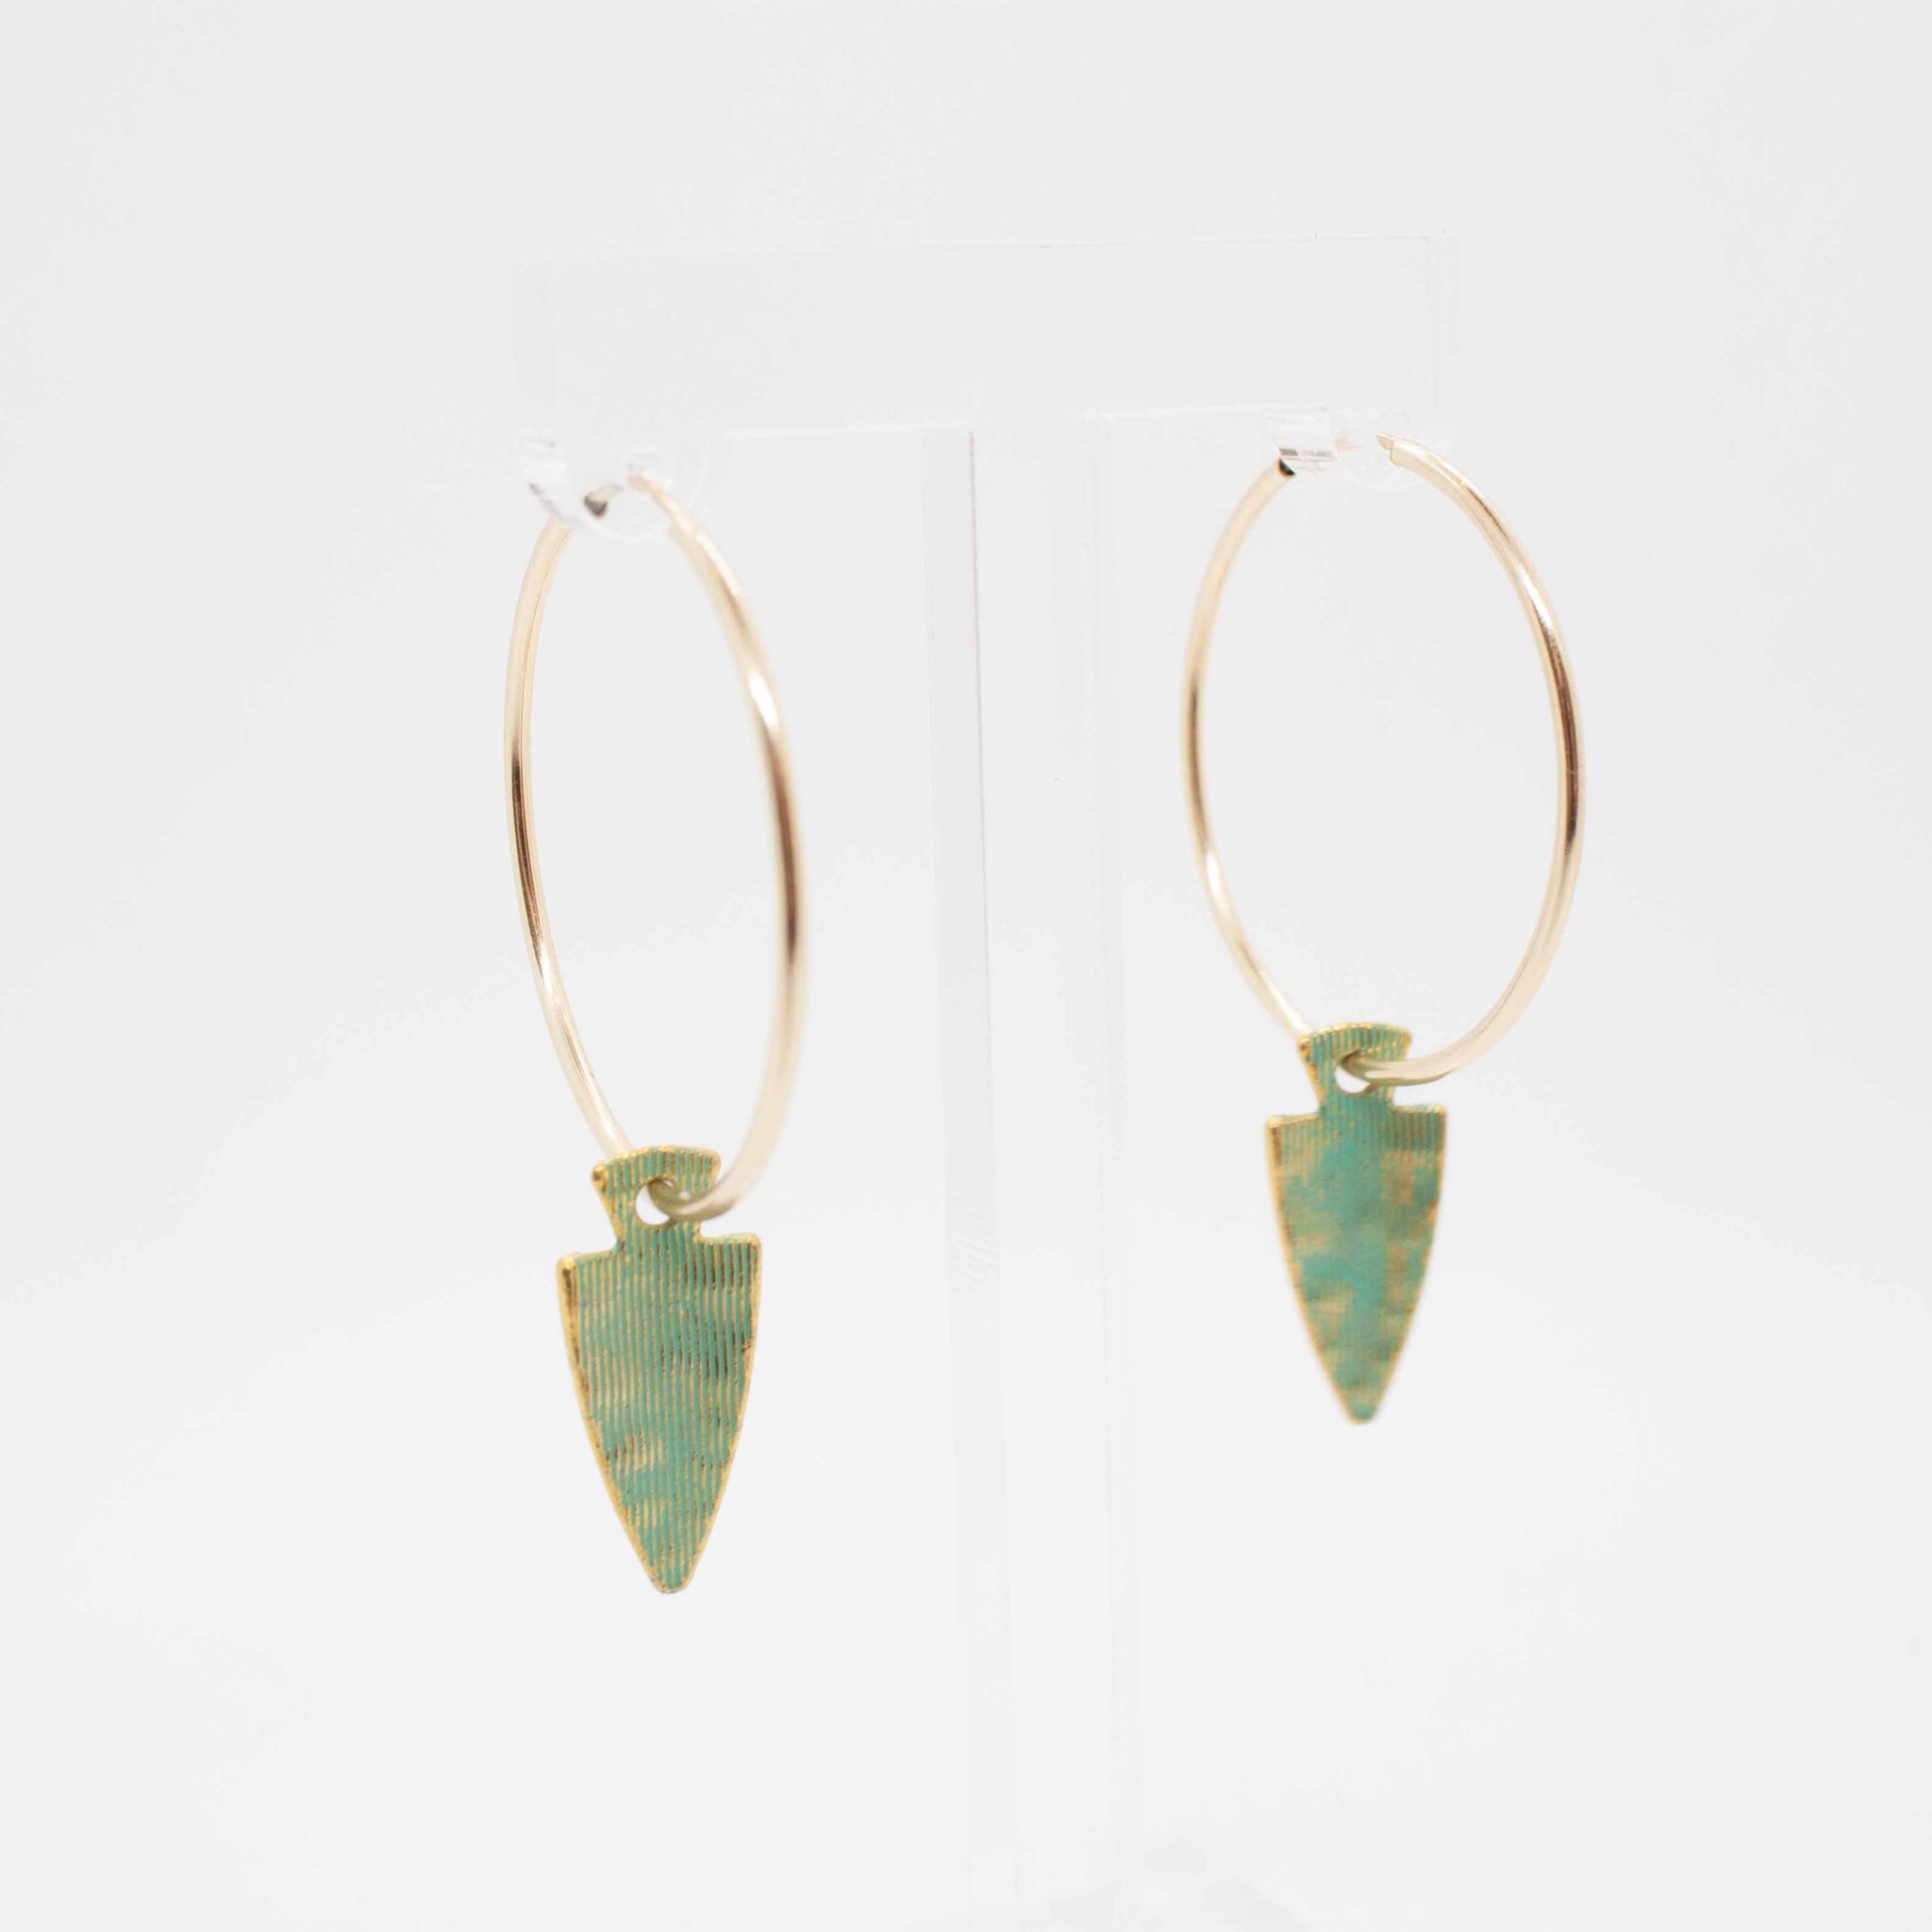 Get ready for battle in these turquoise and gold beauties! 40mm gold filled hoop earrings with vintage arrow head charms. Made in Toronto kp jewelry co.